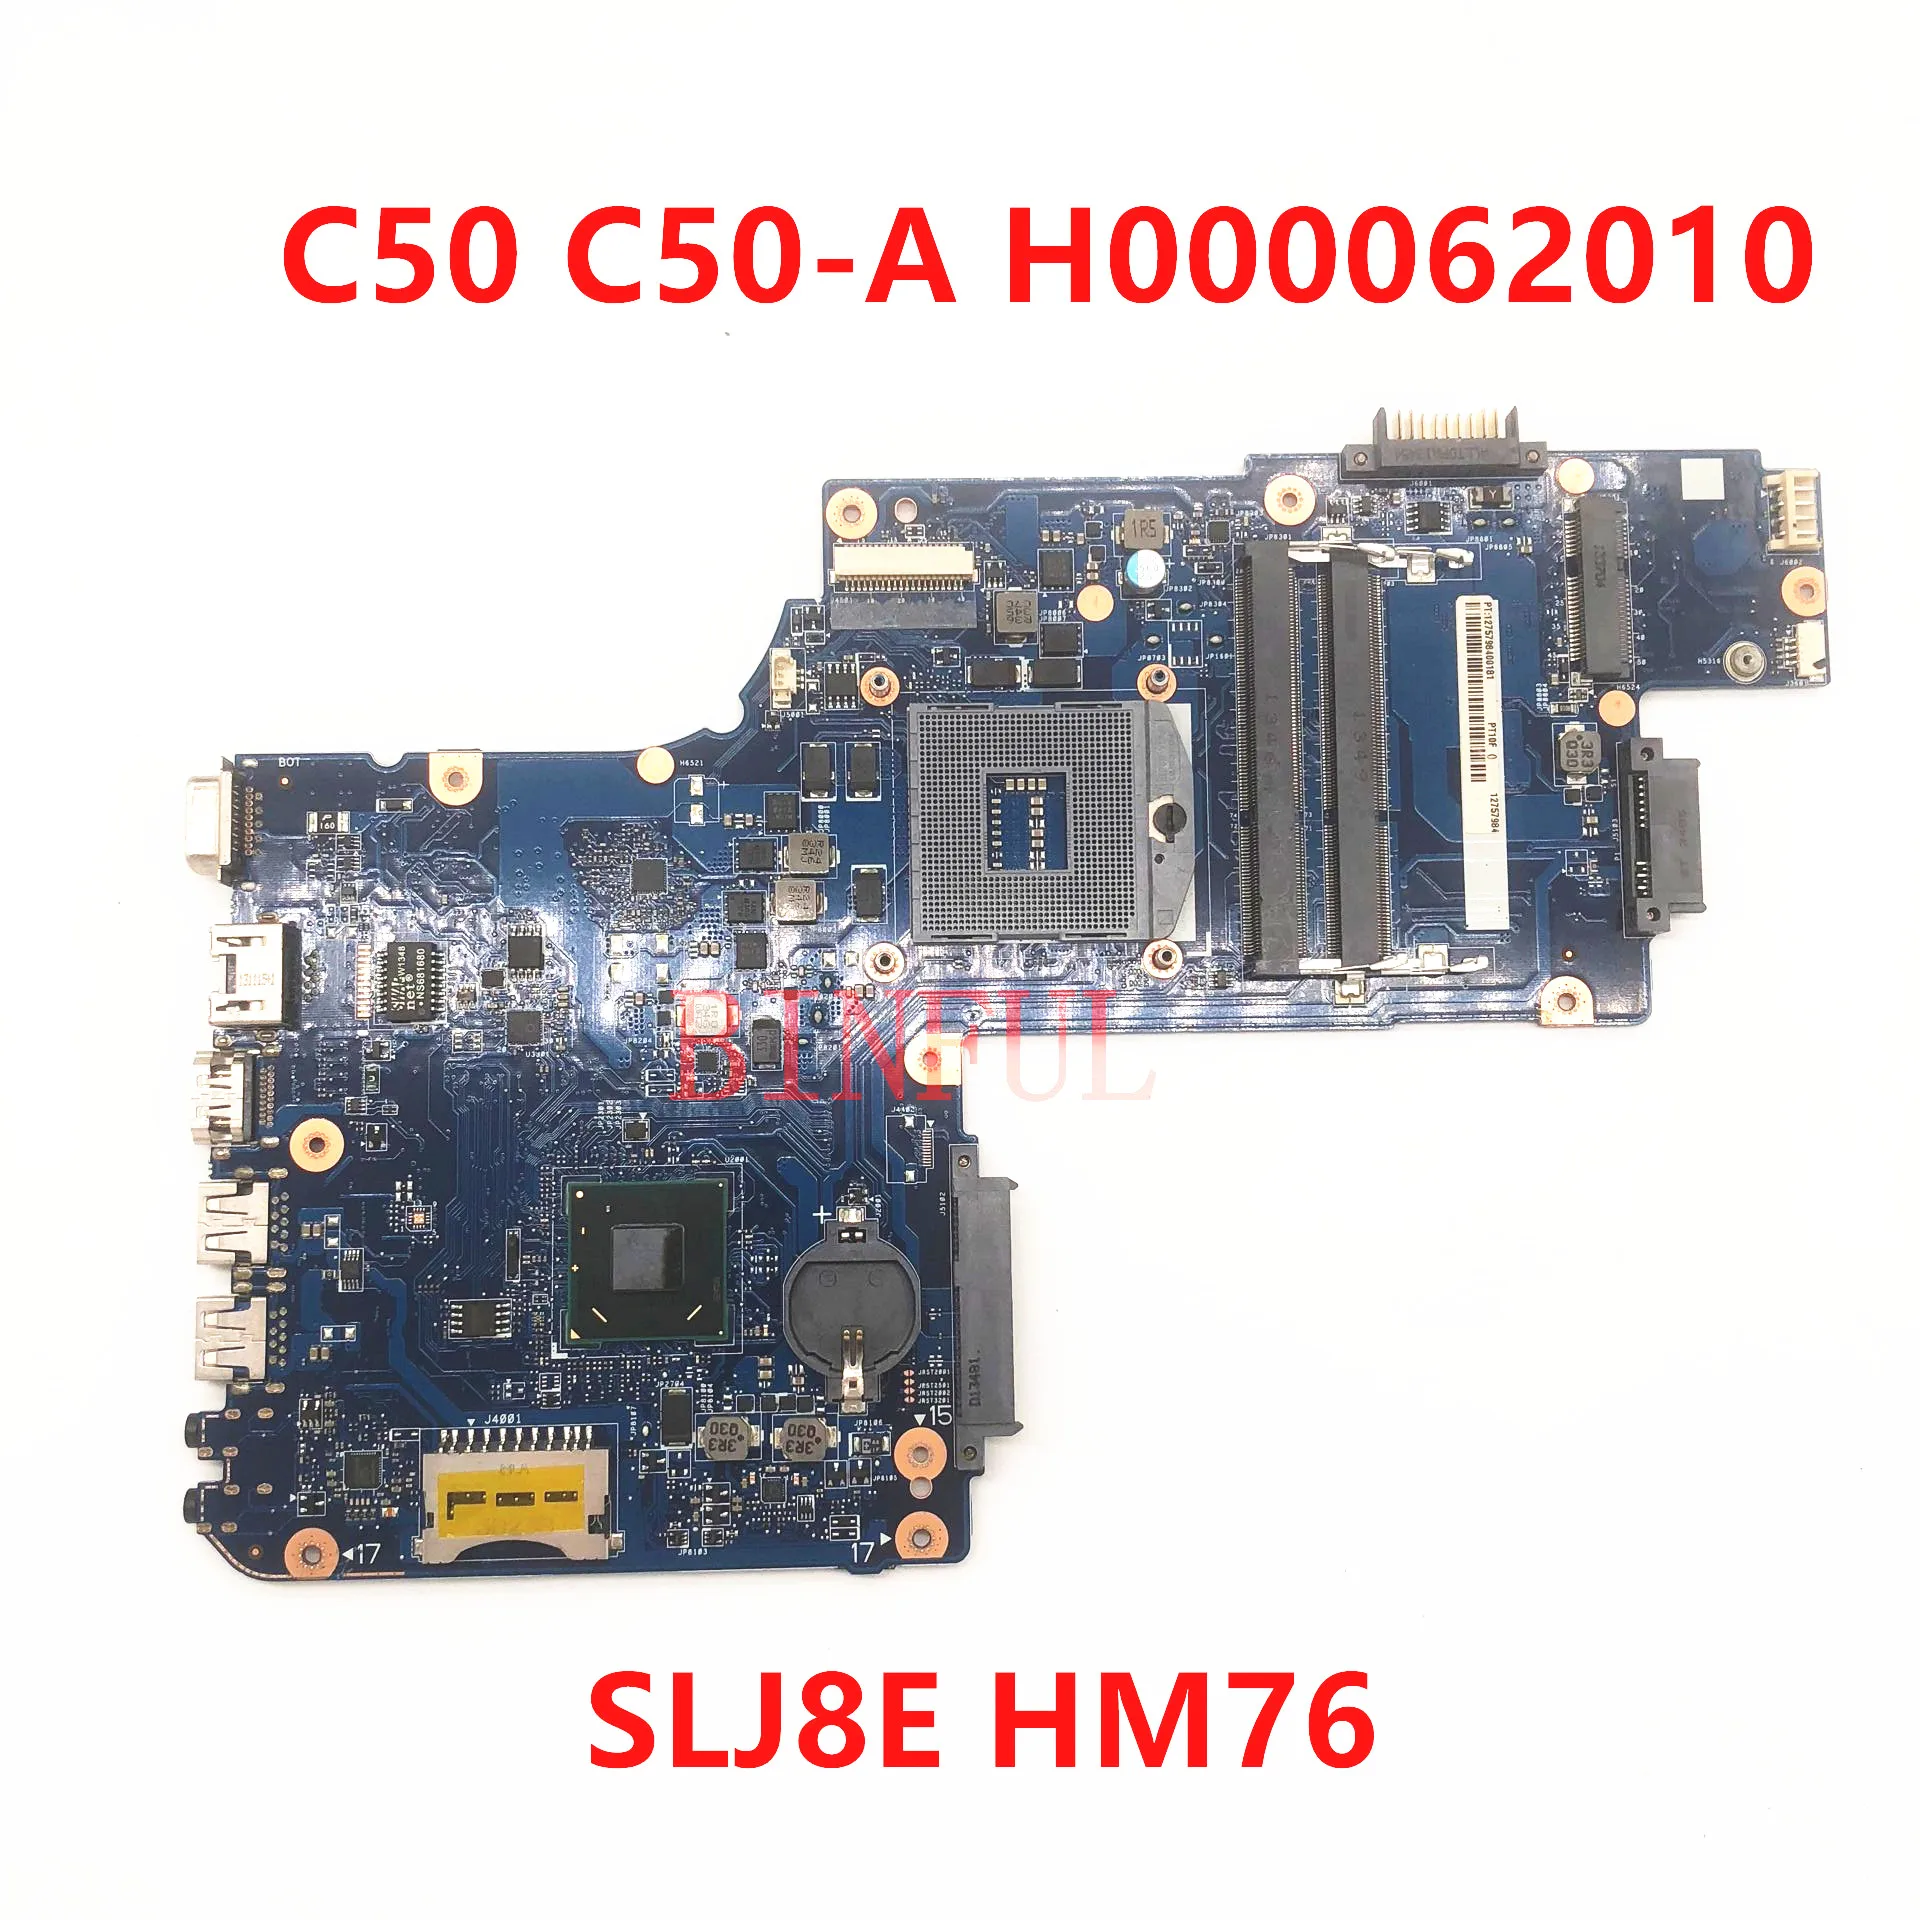 H000062010 H000061930 Mainboard For TOSHIBA Satellite C50 C50-A Laptop Motherboard HM76 SLJ8E 100% Full Tested High quality